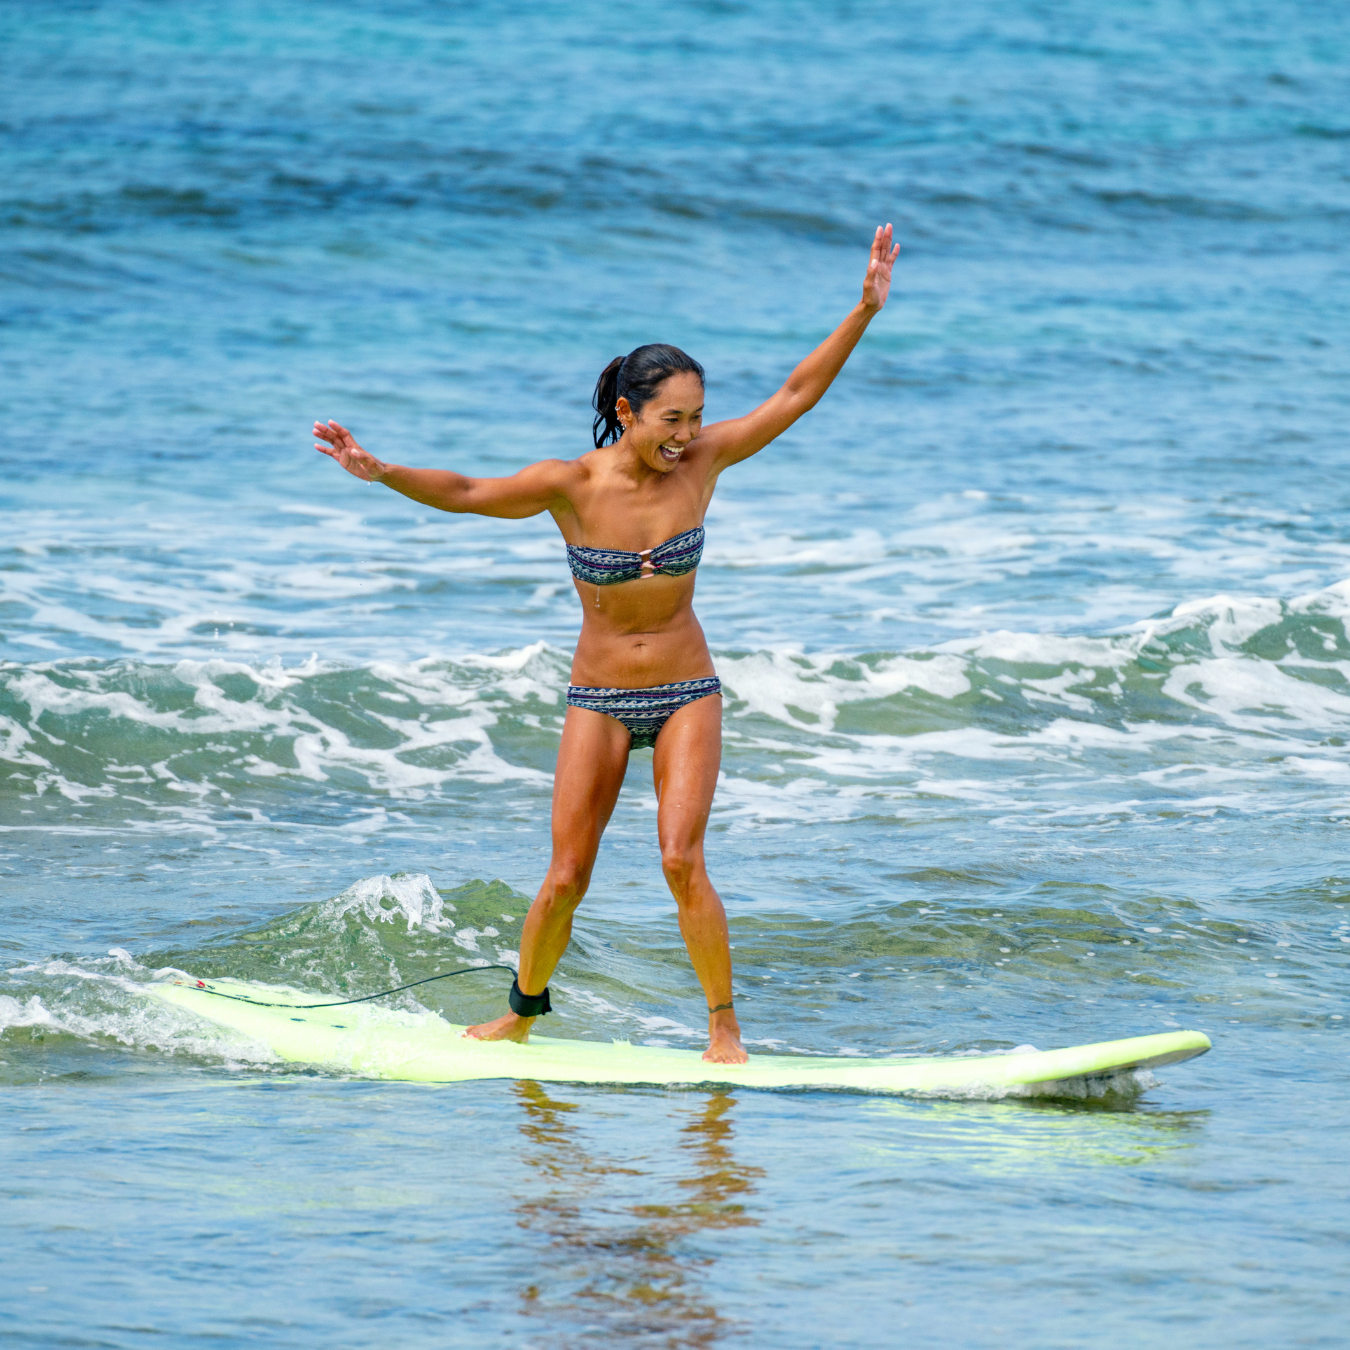 Something wonderful happens when women surf. We grow more confident in ourselves, we wash away the cares of the world and find our flow in life. Come and learn to surf with us! Feel sun-kissed and carefree, as you have fun with new friends, while surfing warm water waves.